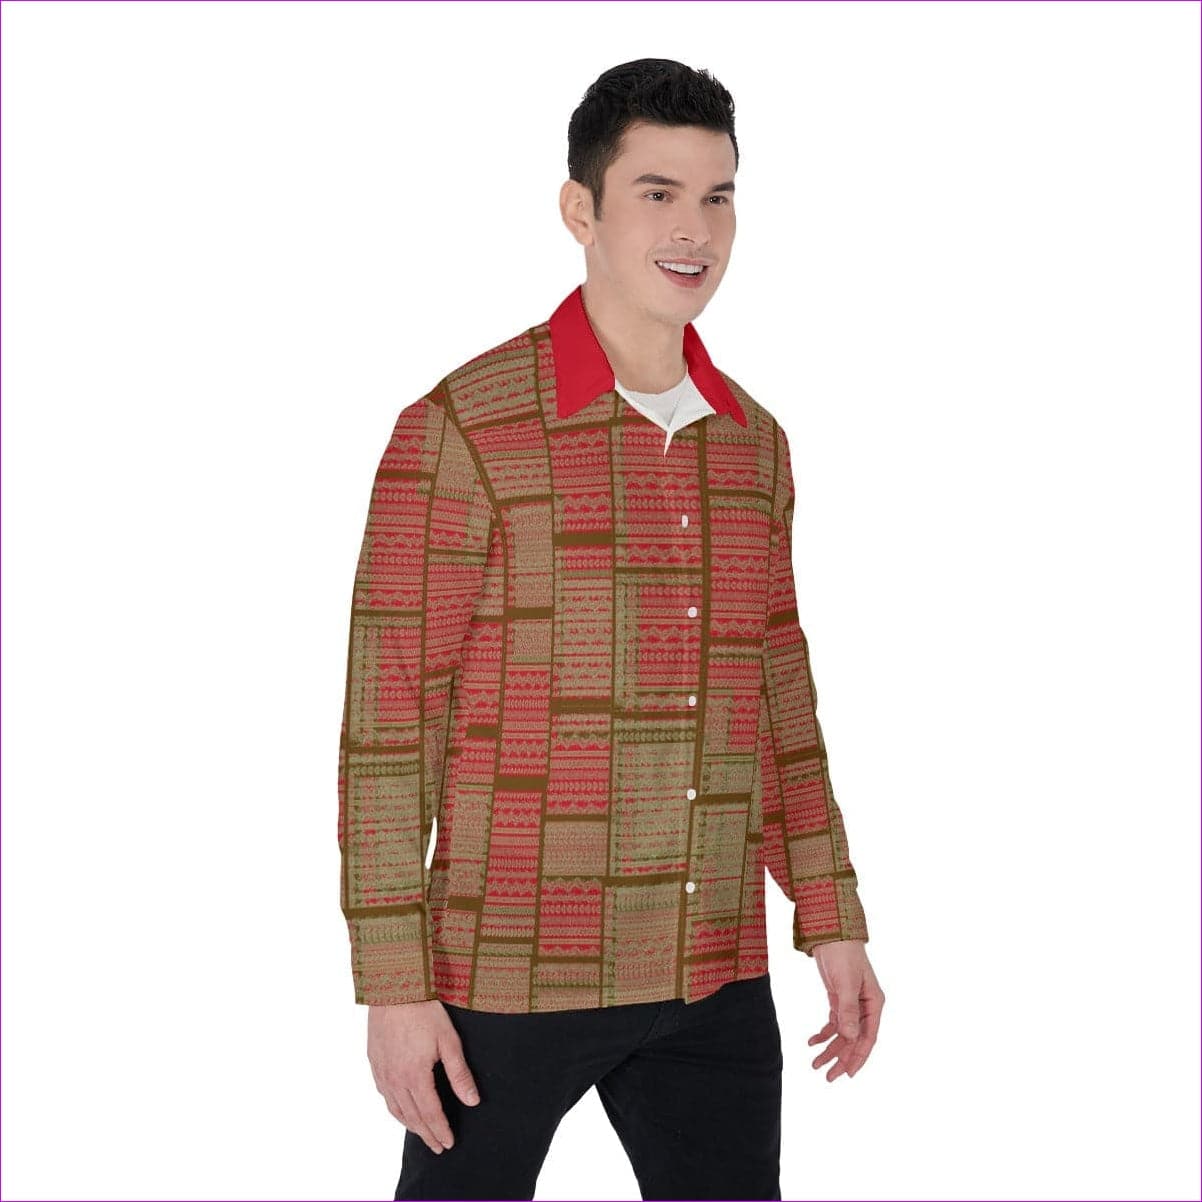 Chained 2 Men's Long Sleeve Button-Up Shirt - men's button-up shirt at TFC&H Co.